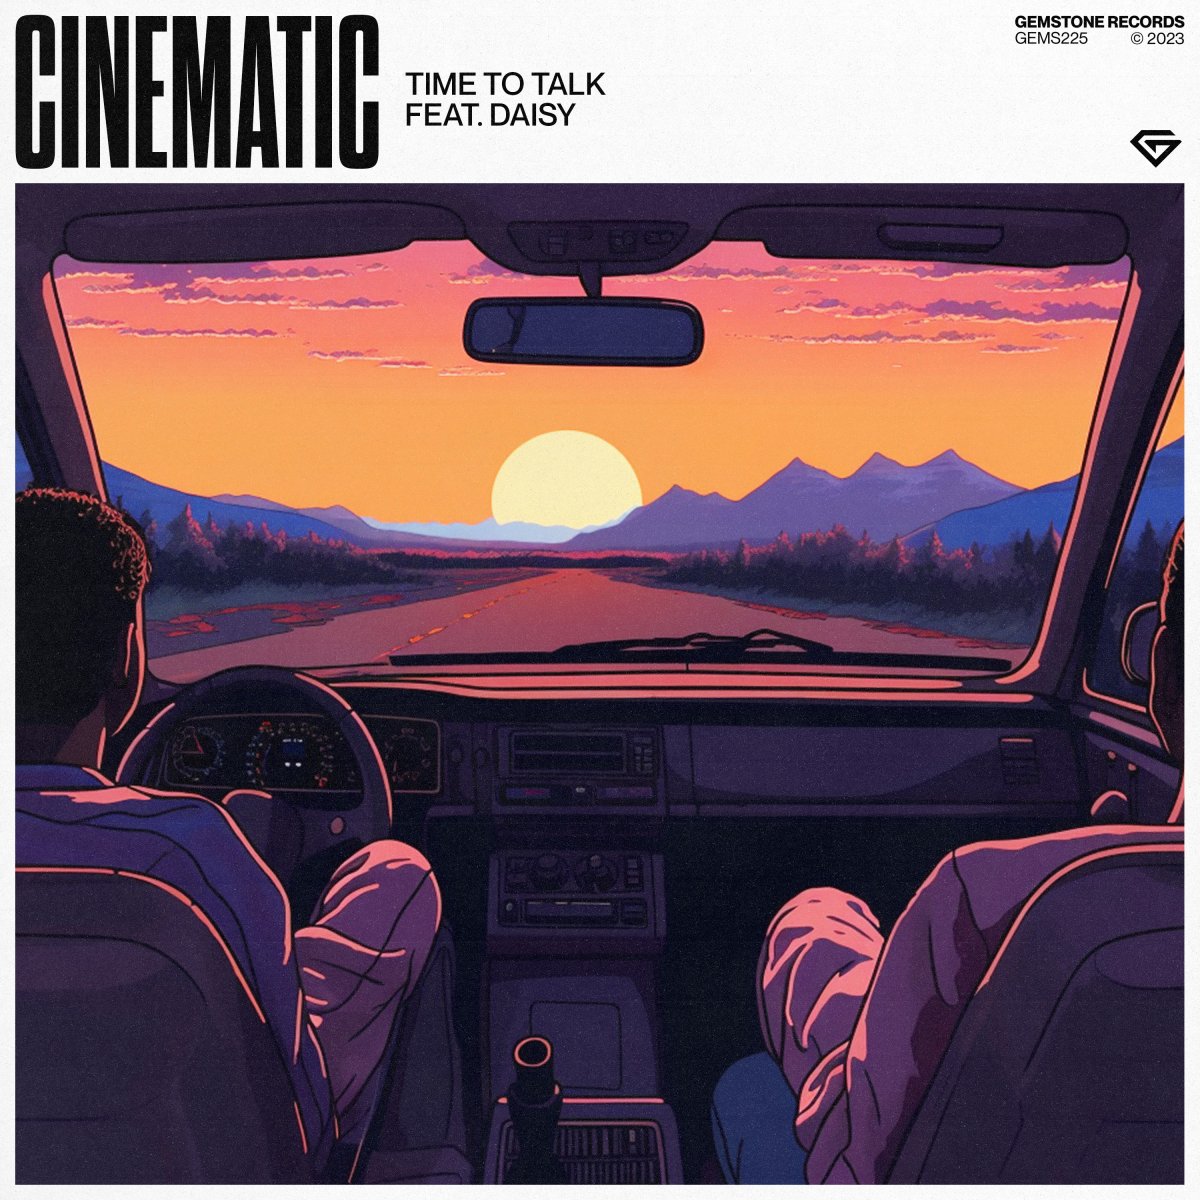 Cinematic - Time To Talk⁠ feat. Daisy⁠ 